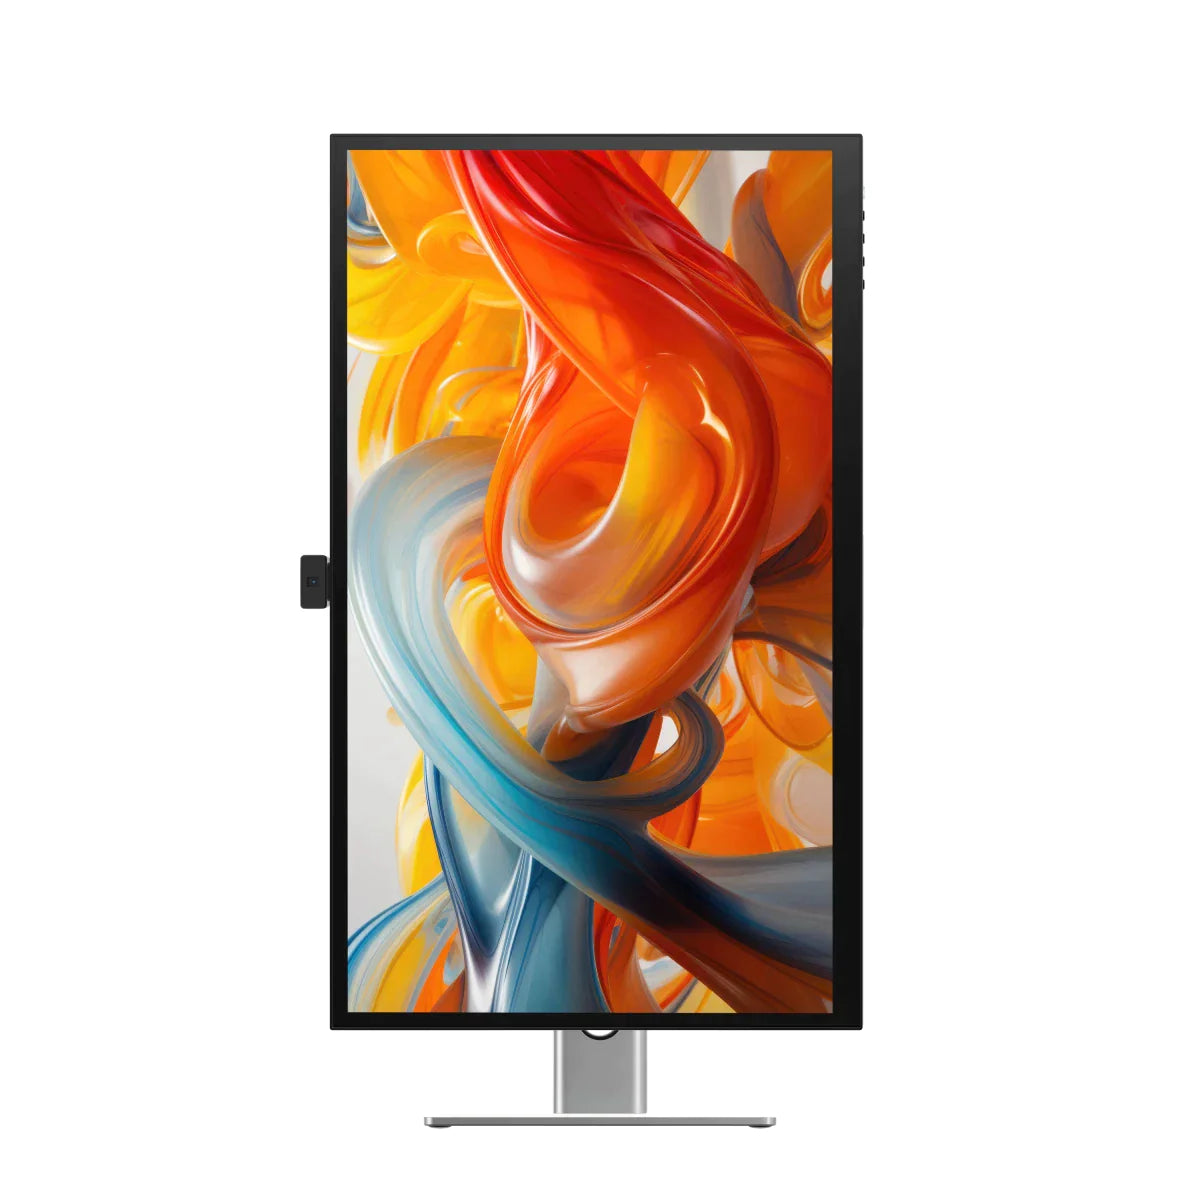 CLARITY 27" UHD 4K Monitor + Clarity Pro Touch 27" UHD 4K Monitor with 65W PD, Webcam and Touchscreen + Dual 4K Universal Docking Station HDMI Edition